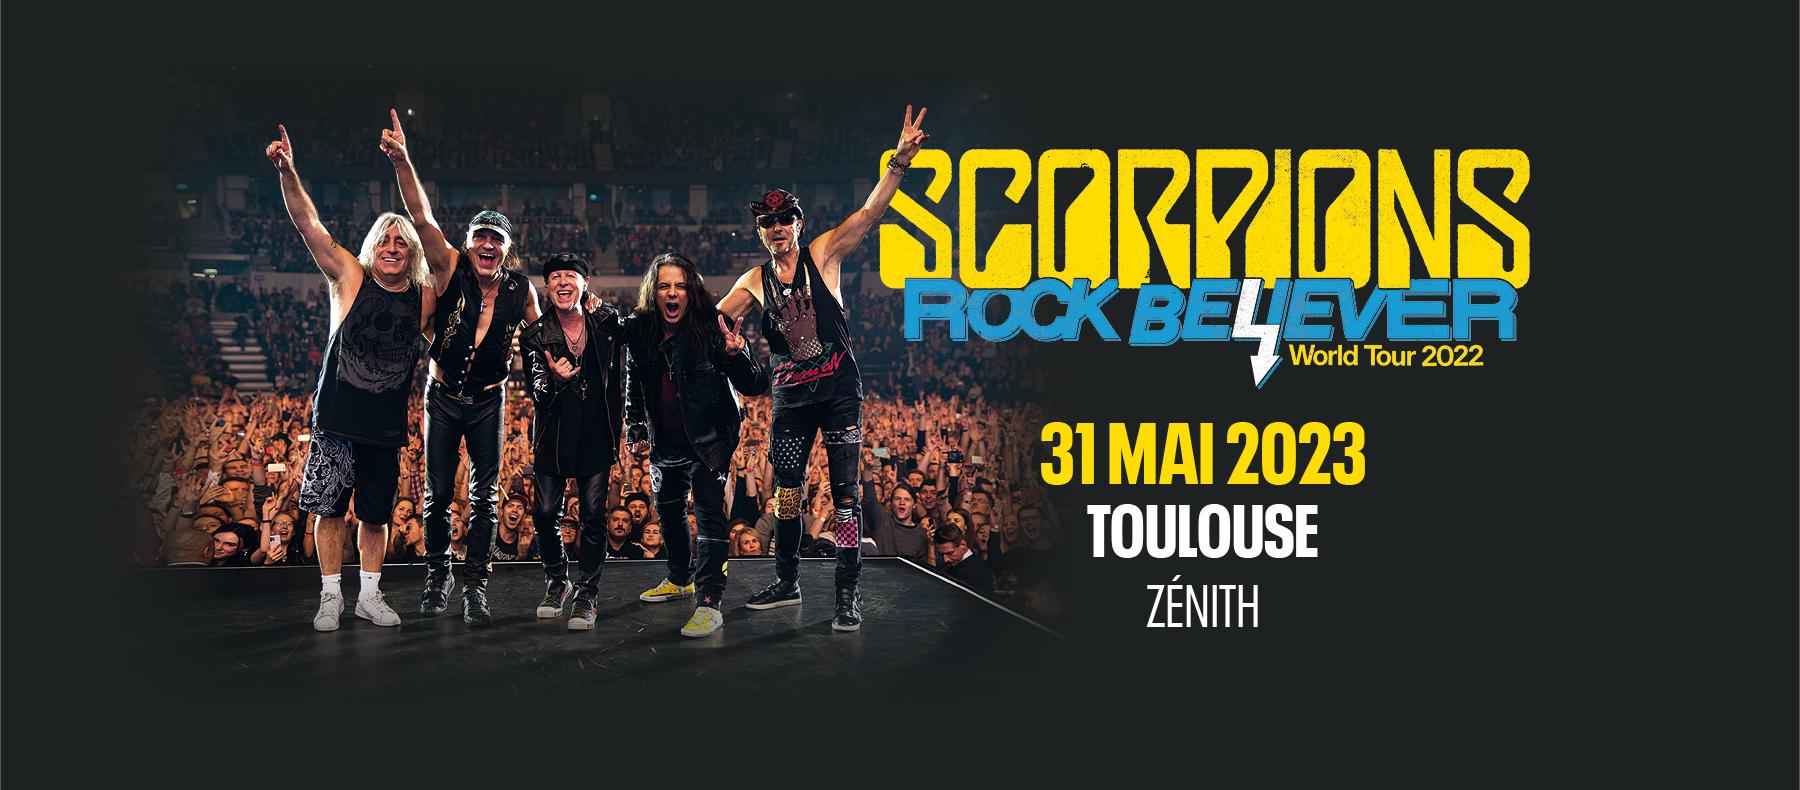 Scorpions toulouse 2023